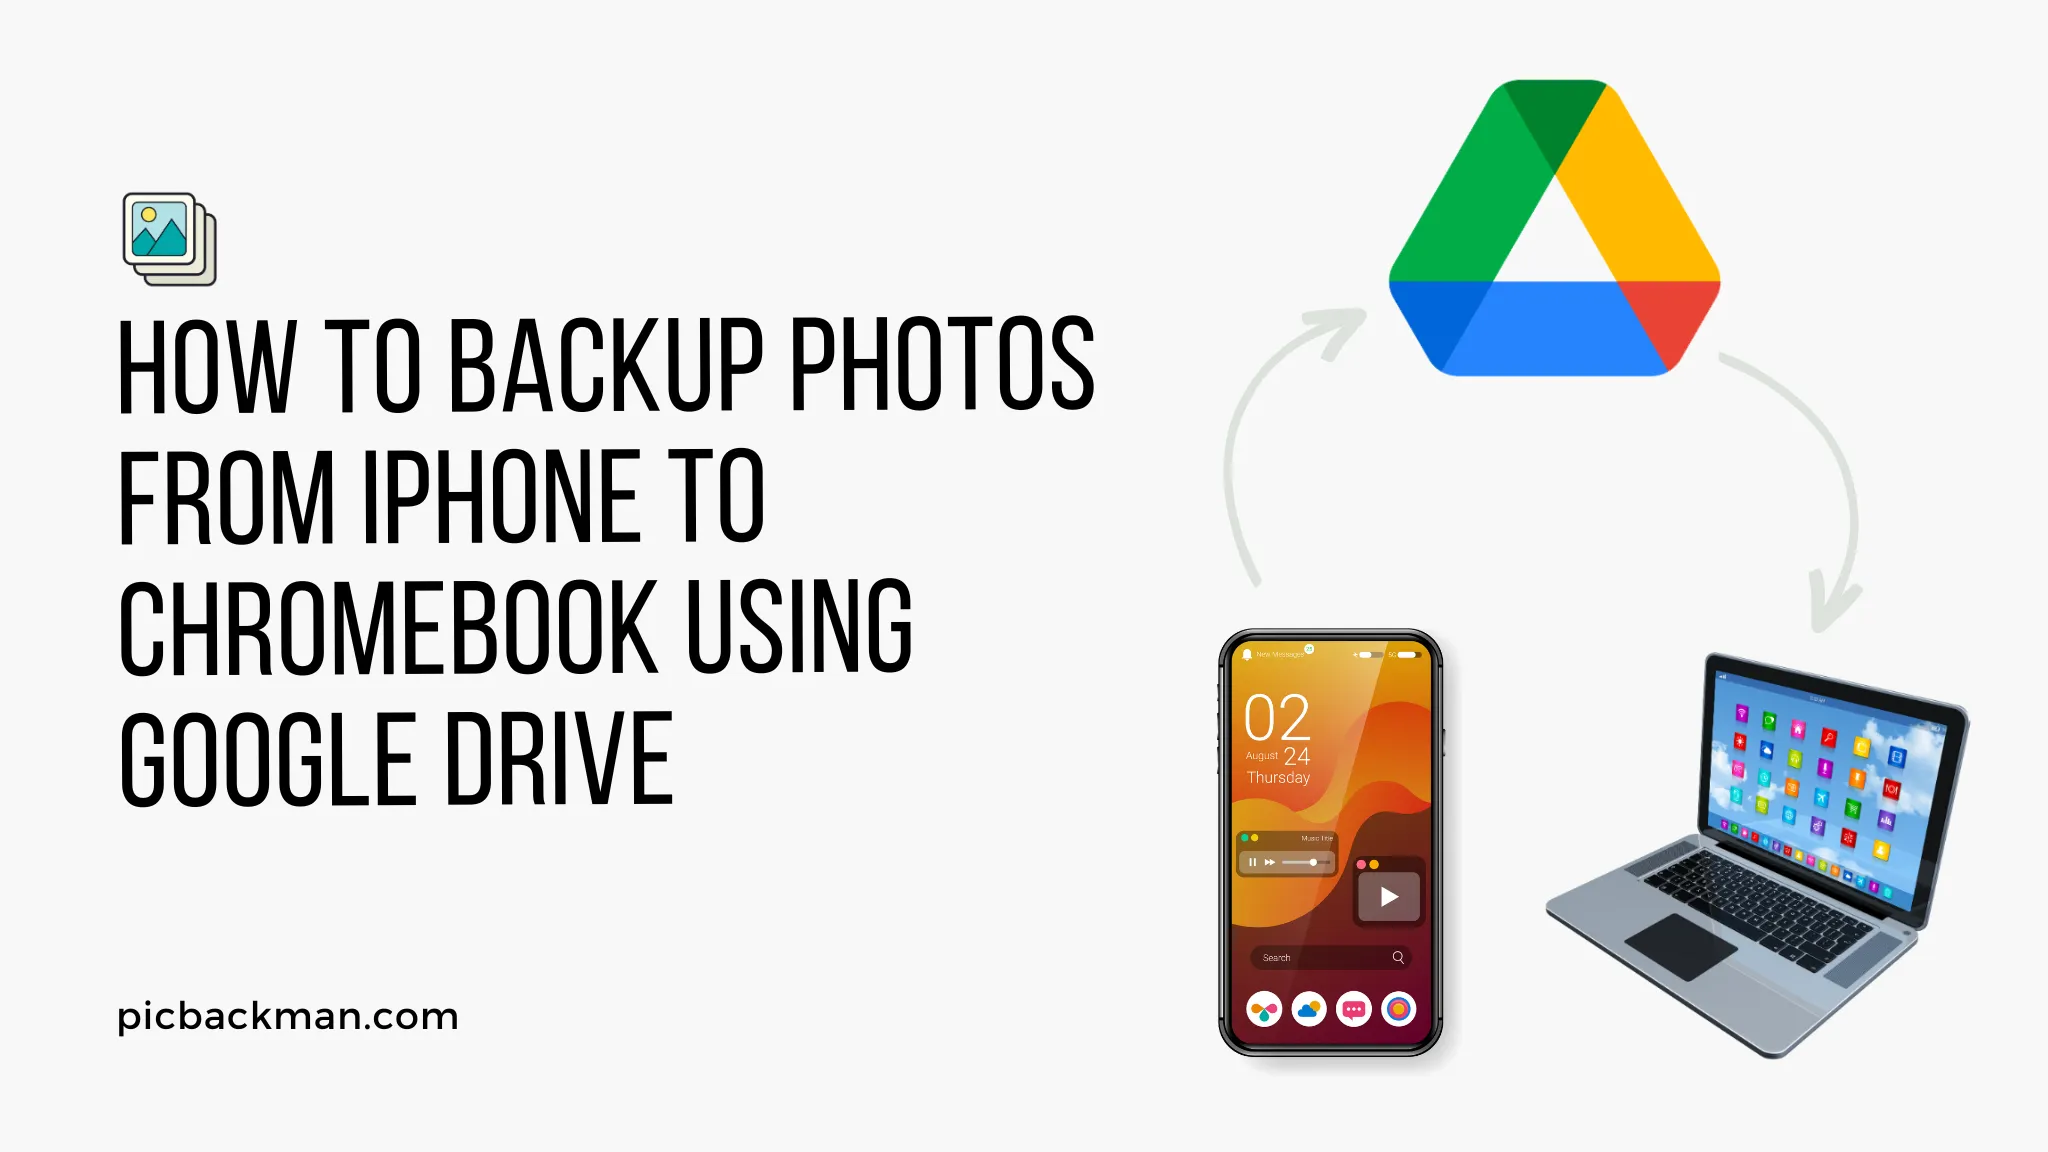 How to Backup Photos from iPhone to Chromebook Using Google Drive?